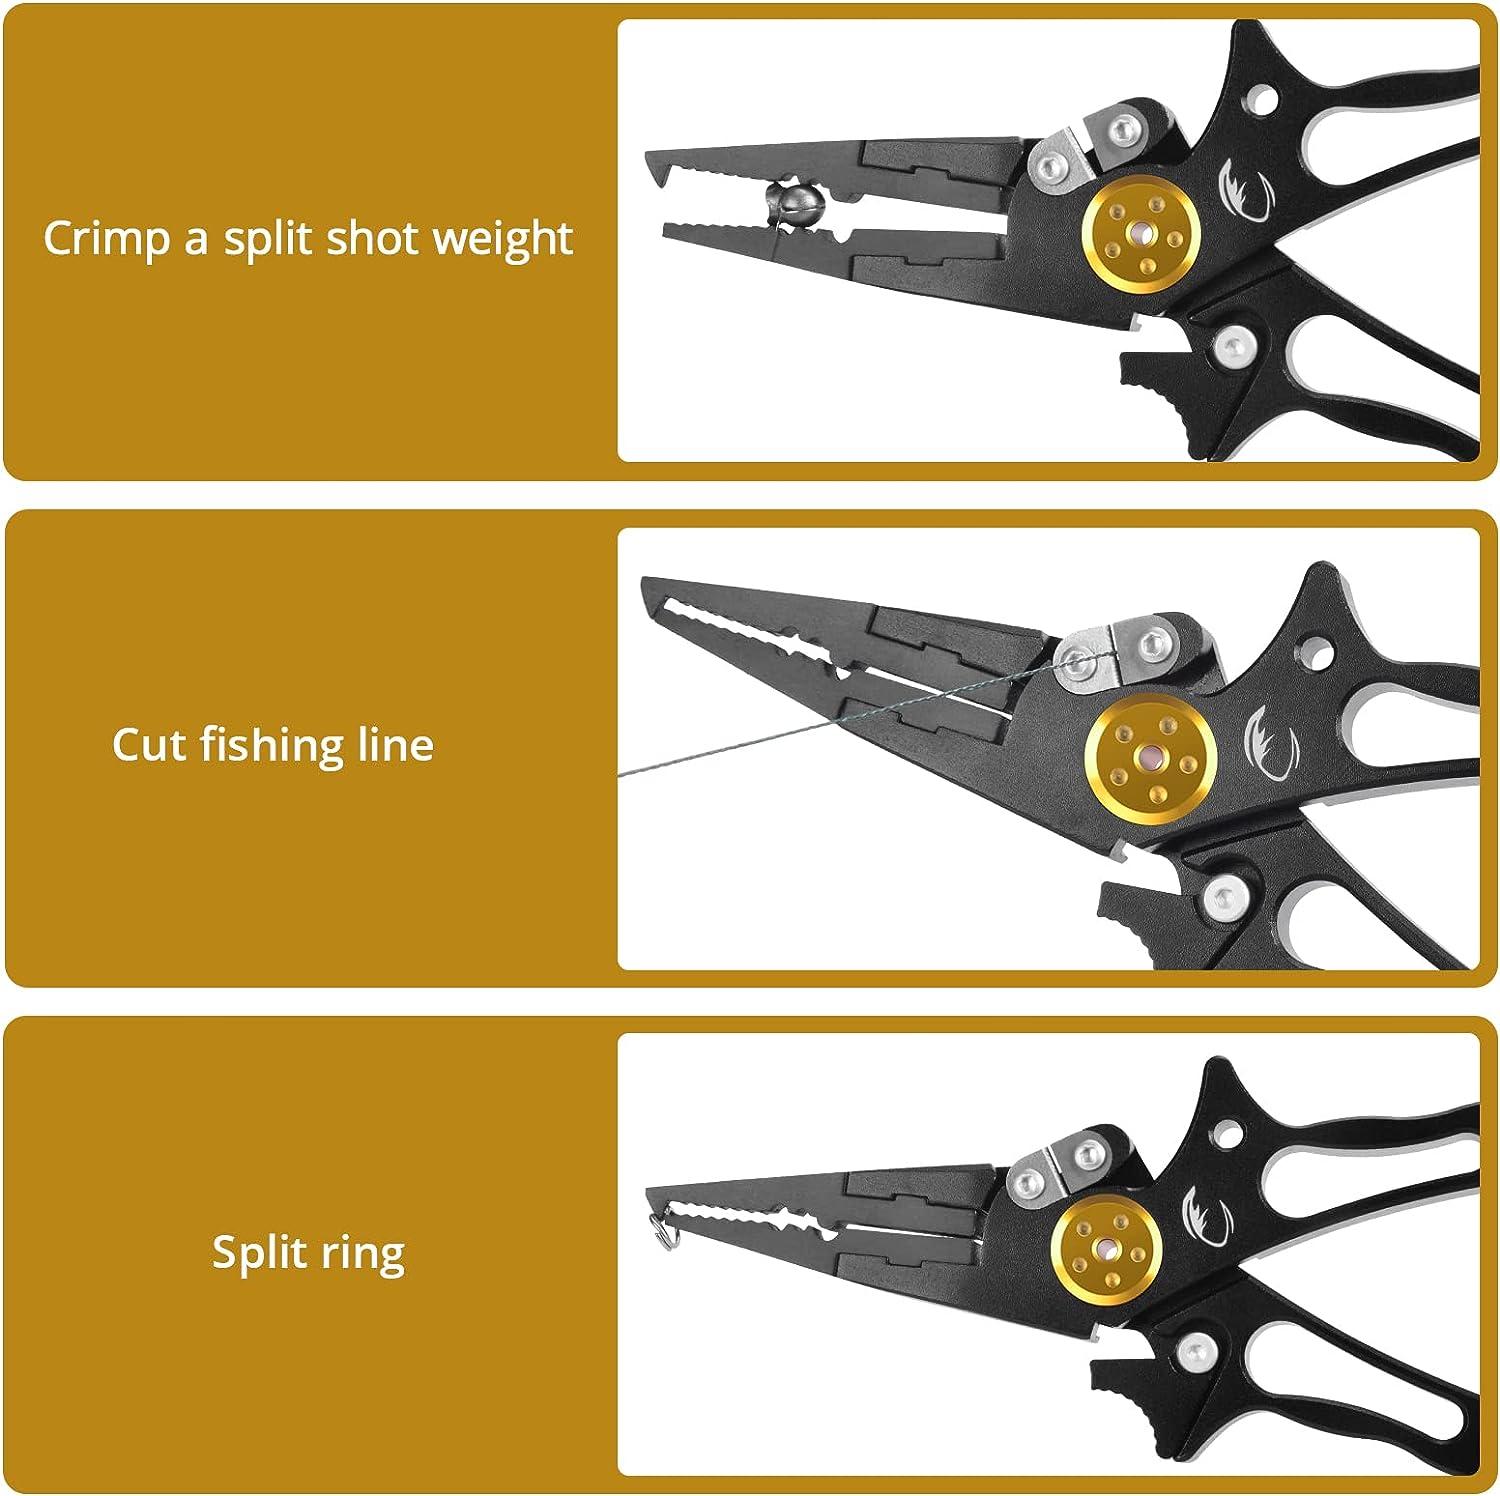 Calamus Fishing Pliers with Fish Lip Gripper, Lightweight Aluminum Fishing  Tools, Line Cutter Hook Remover Split Ring Pliers, Fly Fishing kit, Ice  Fishing Gear, Fishing Gifts for Men A:gold